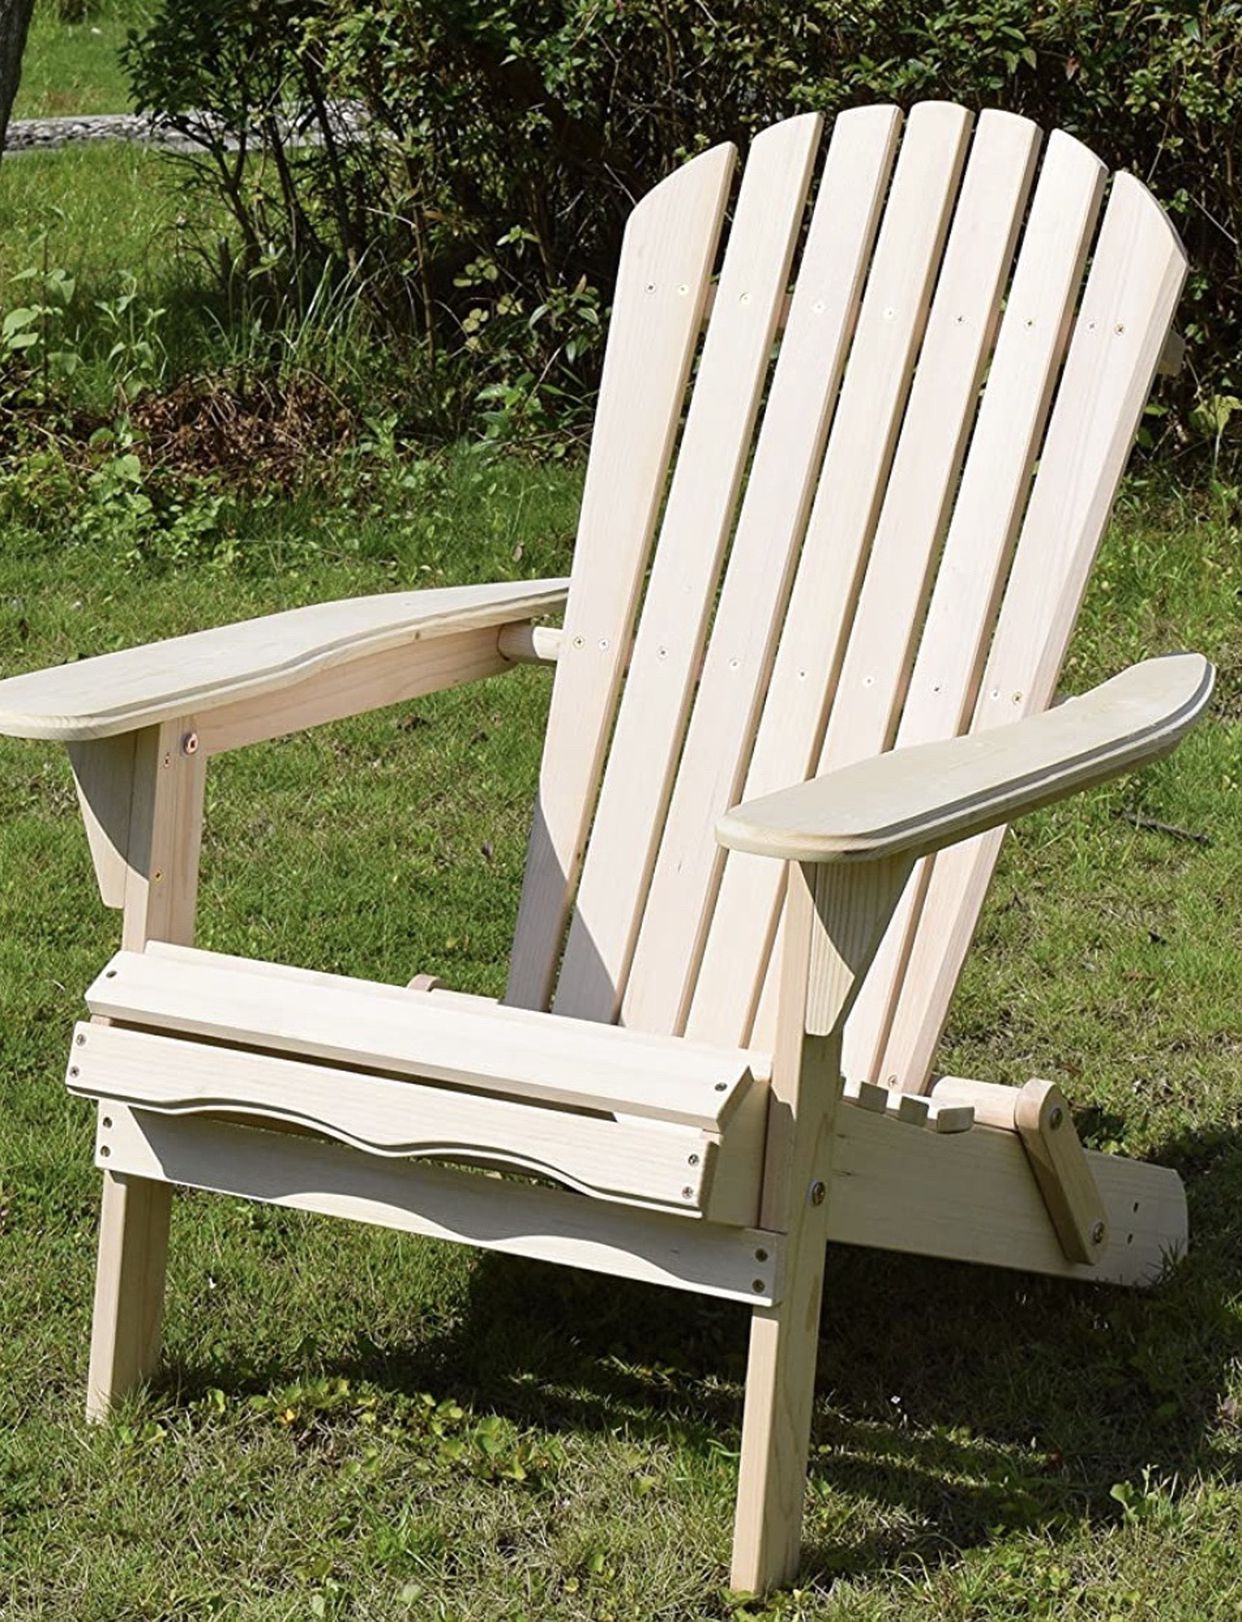 New In Box Wooden Lounge Chair For Pool Outdoors With Natural Smooth Finish